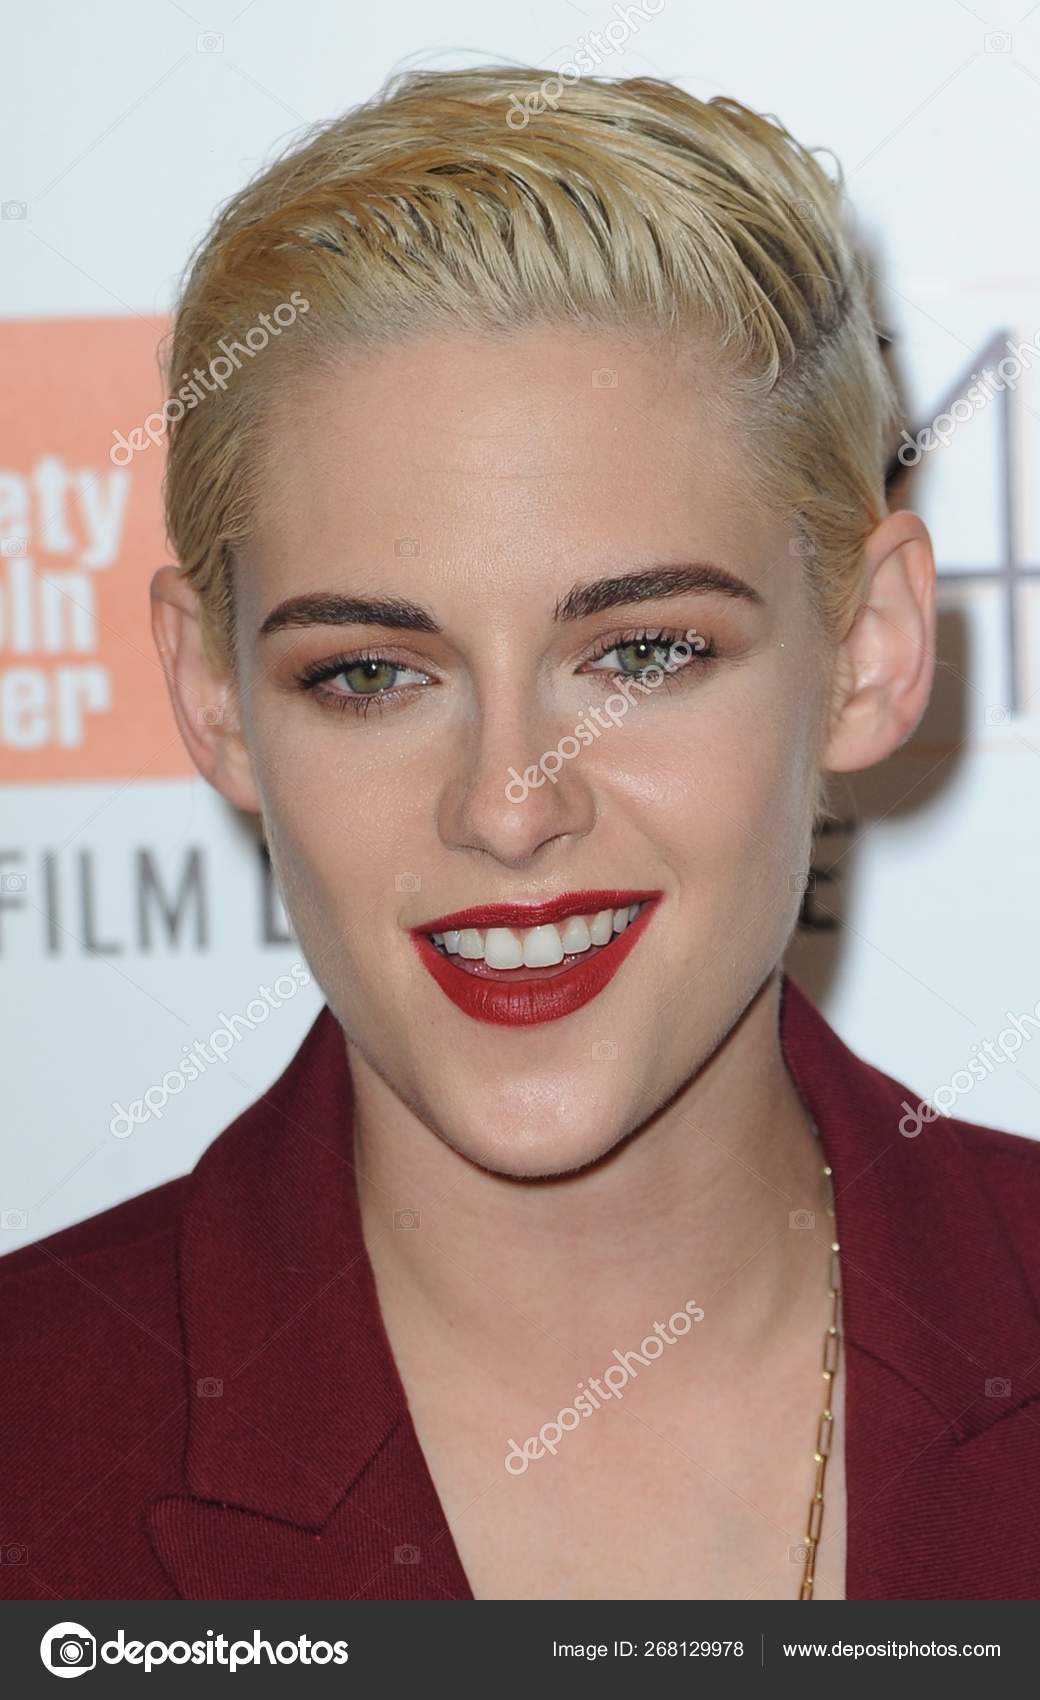 Literally Just 26 Pictures Of Kristen Stewart And Her Newly Shaved Head  That You Can Stare At All Day